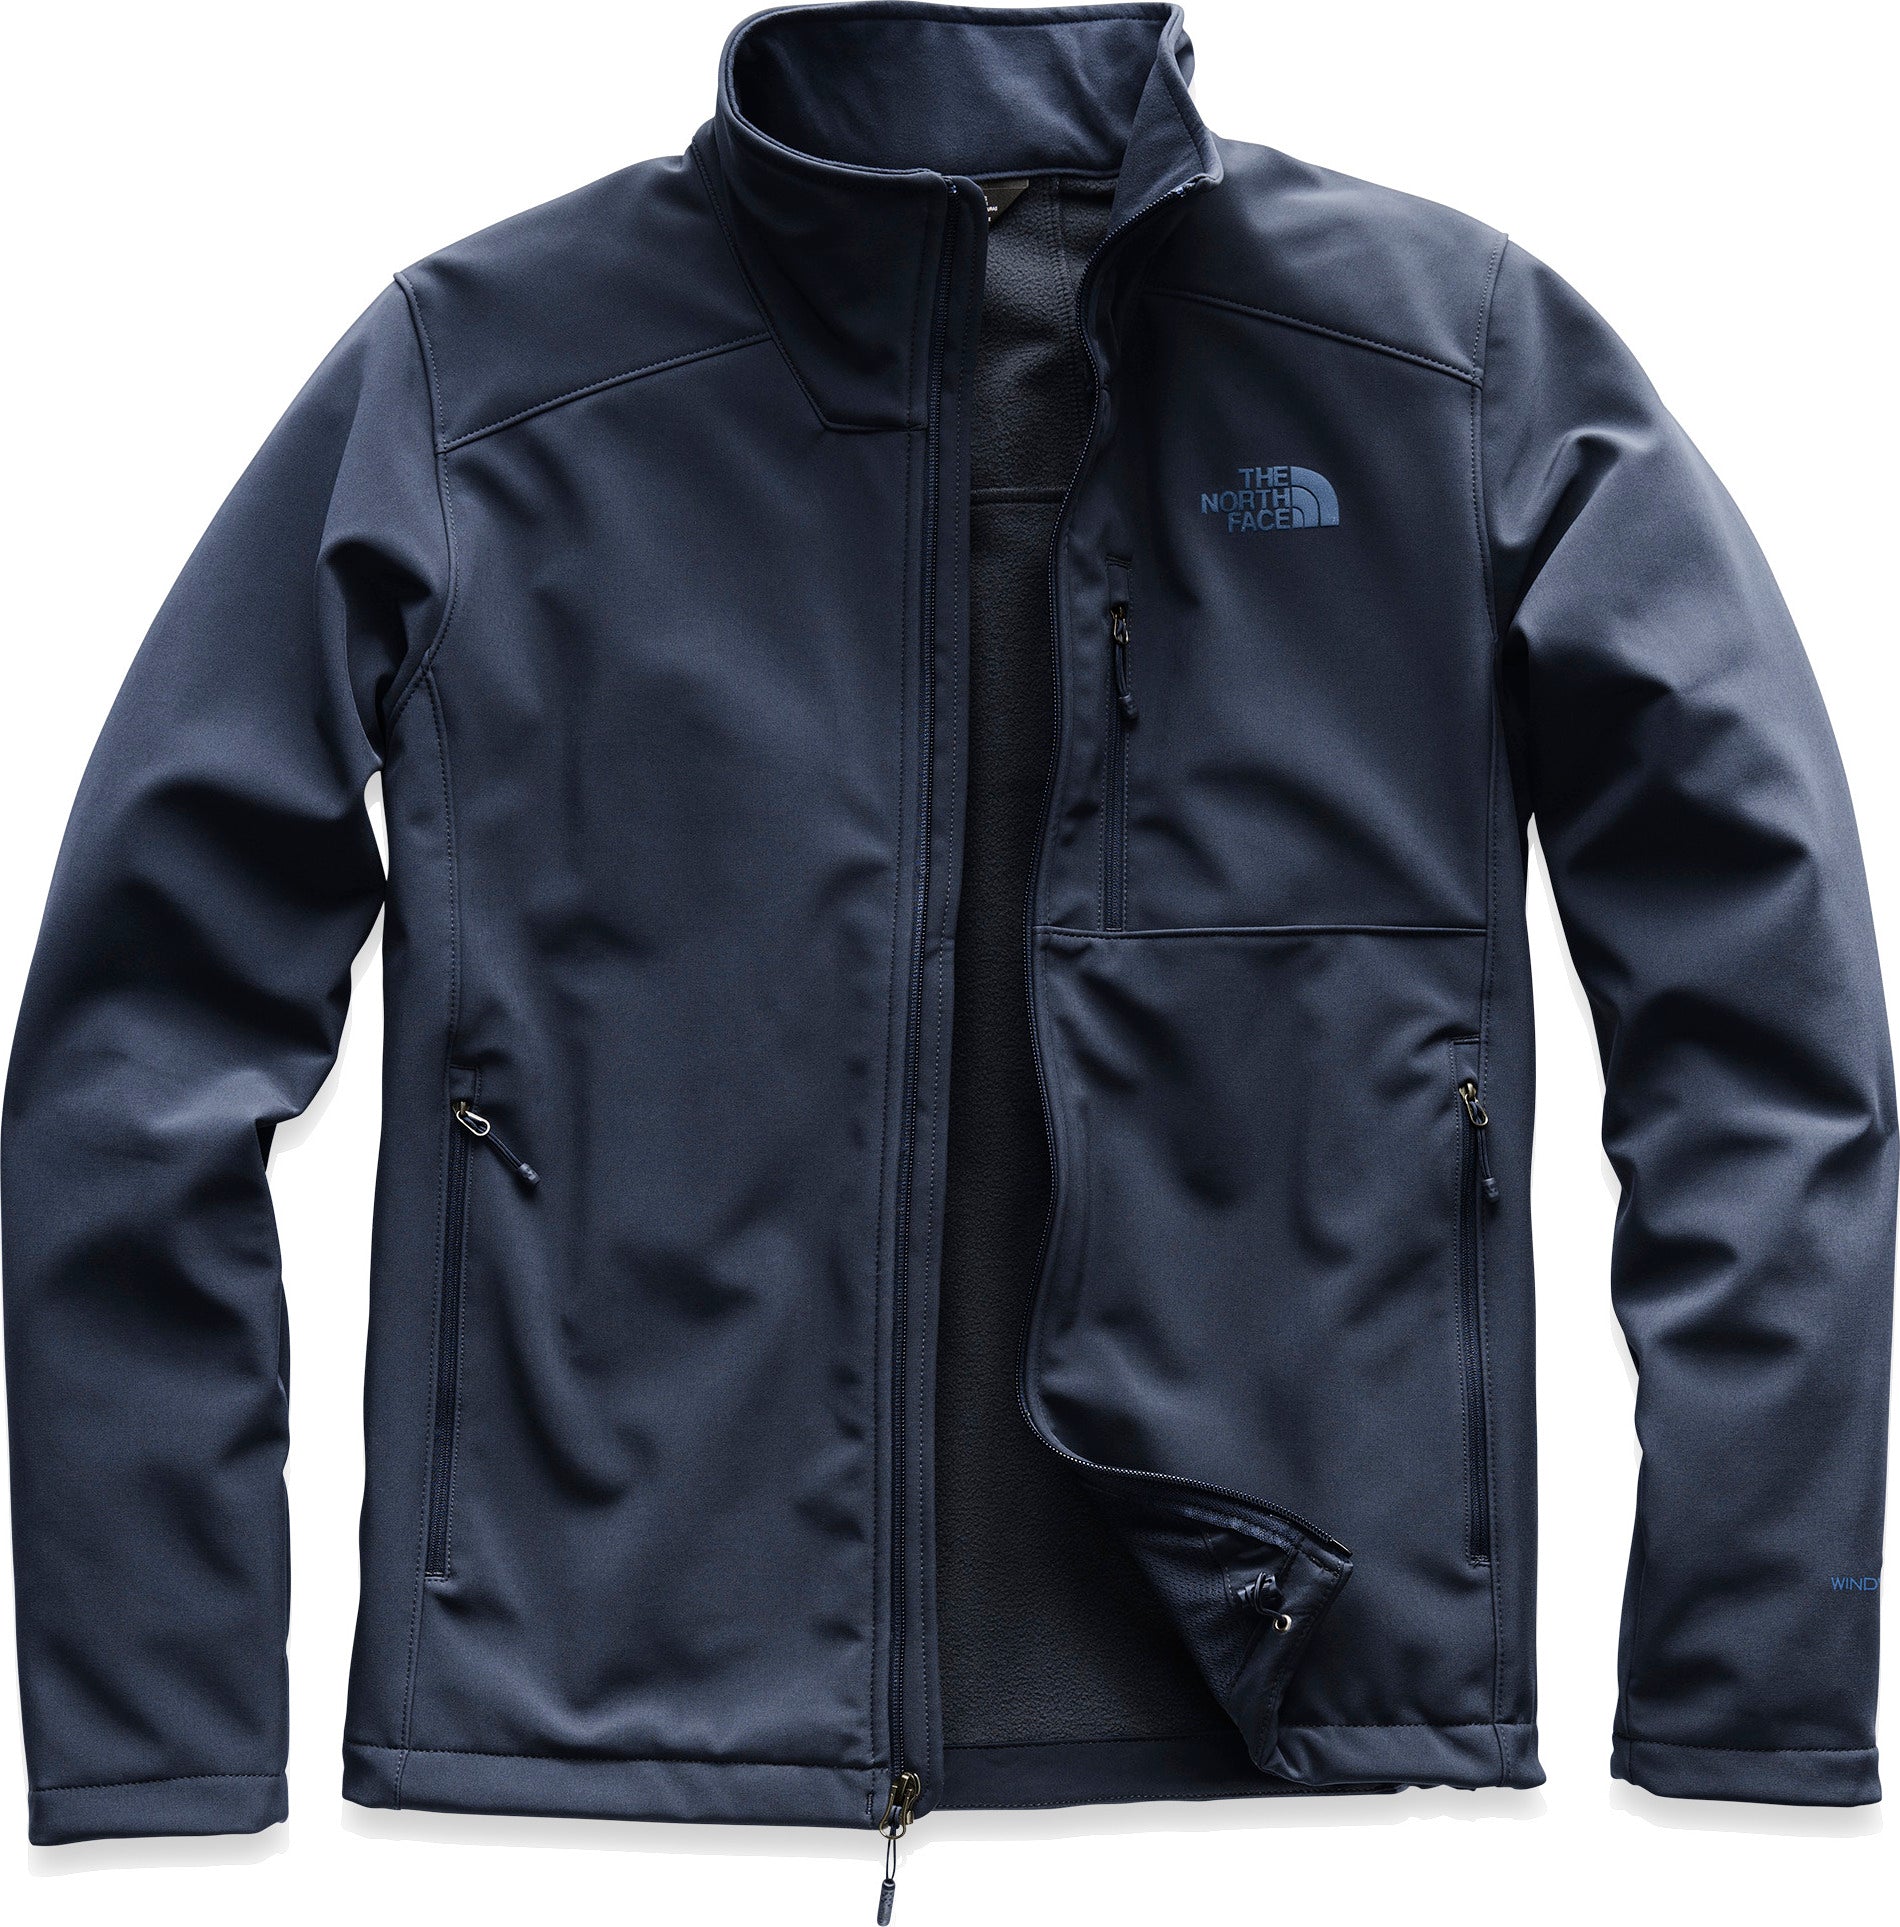 The North Face Apex Bionic 2 Jacket 